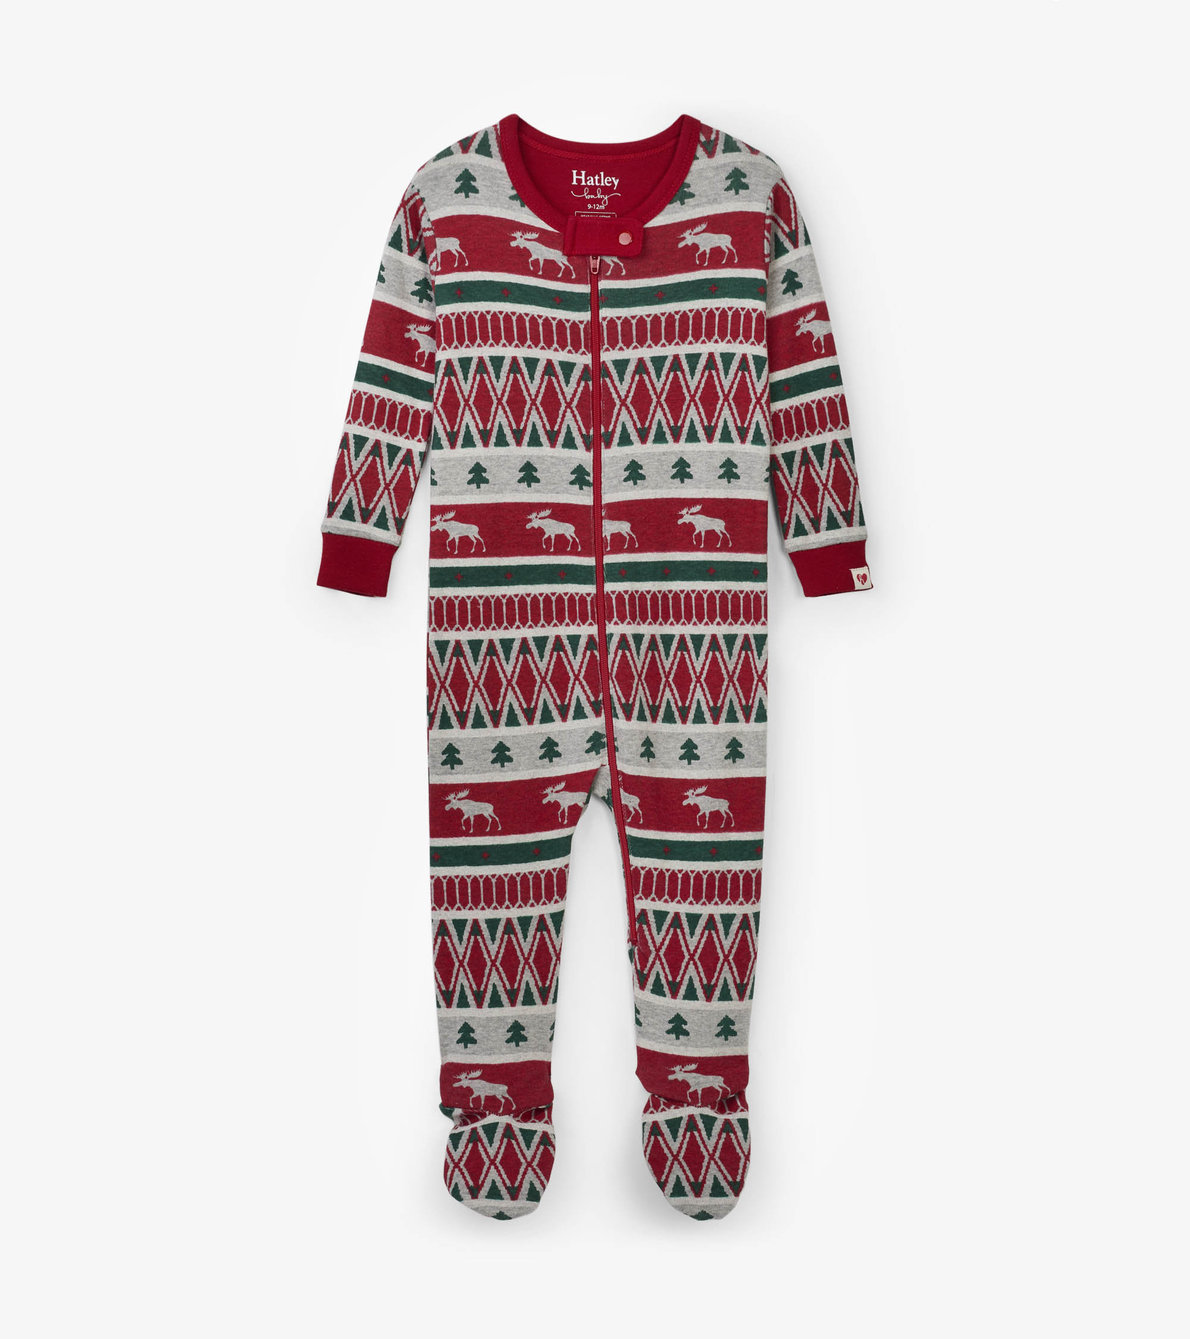 View larger image of Winter Fair Isle Footed Coverall